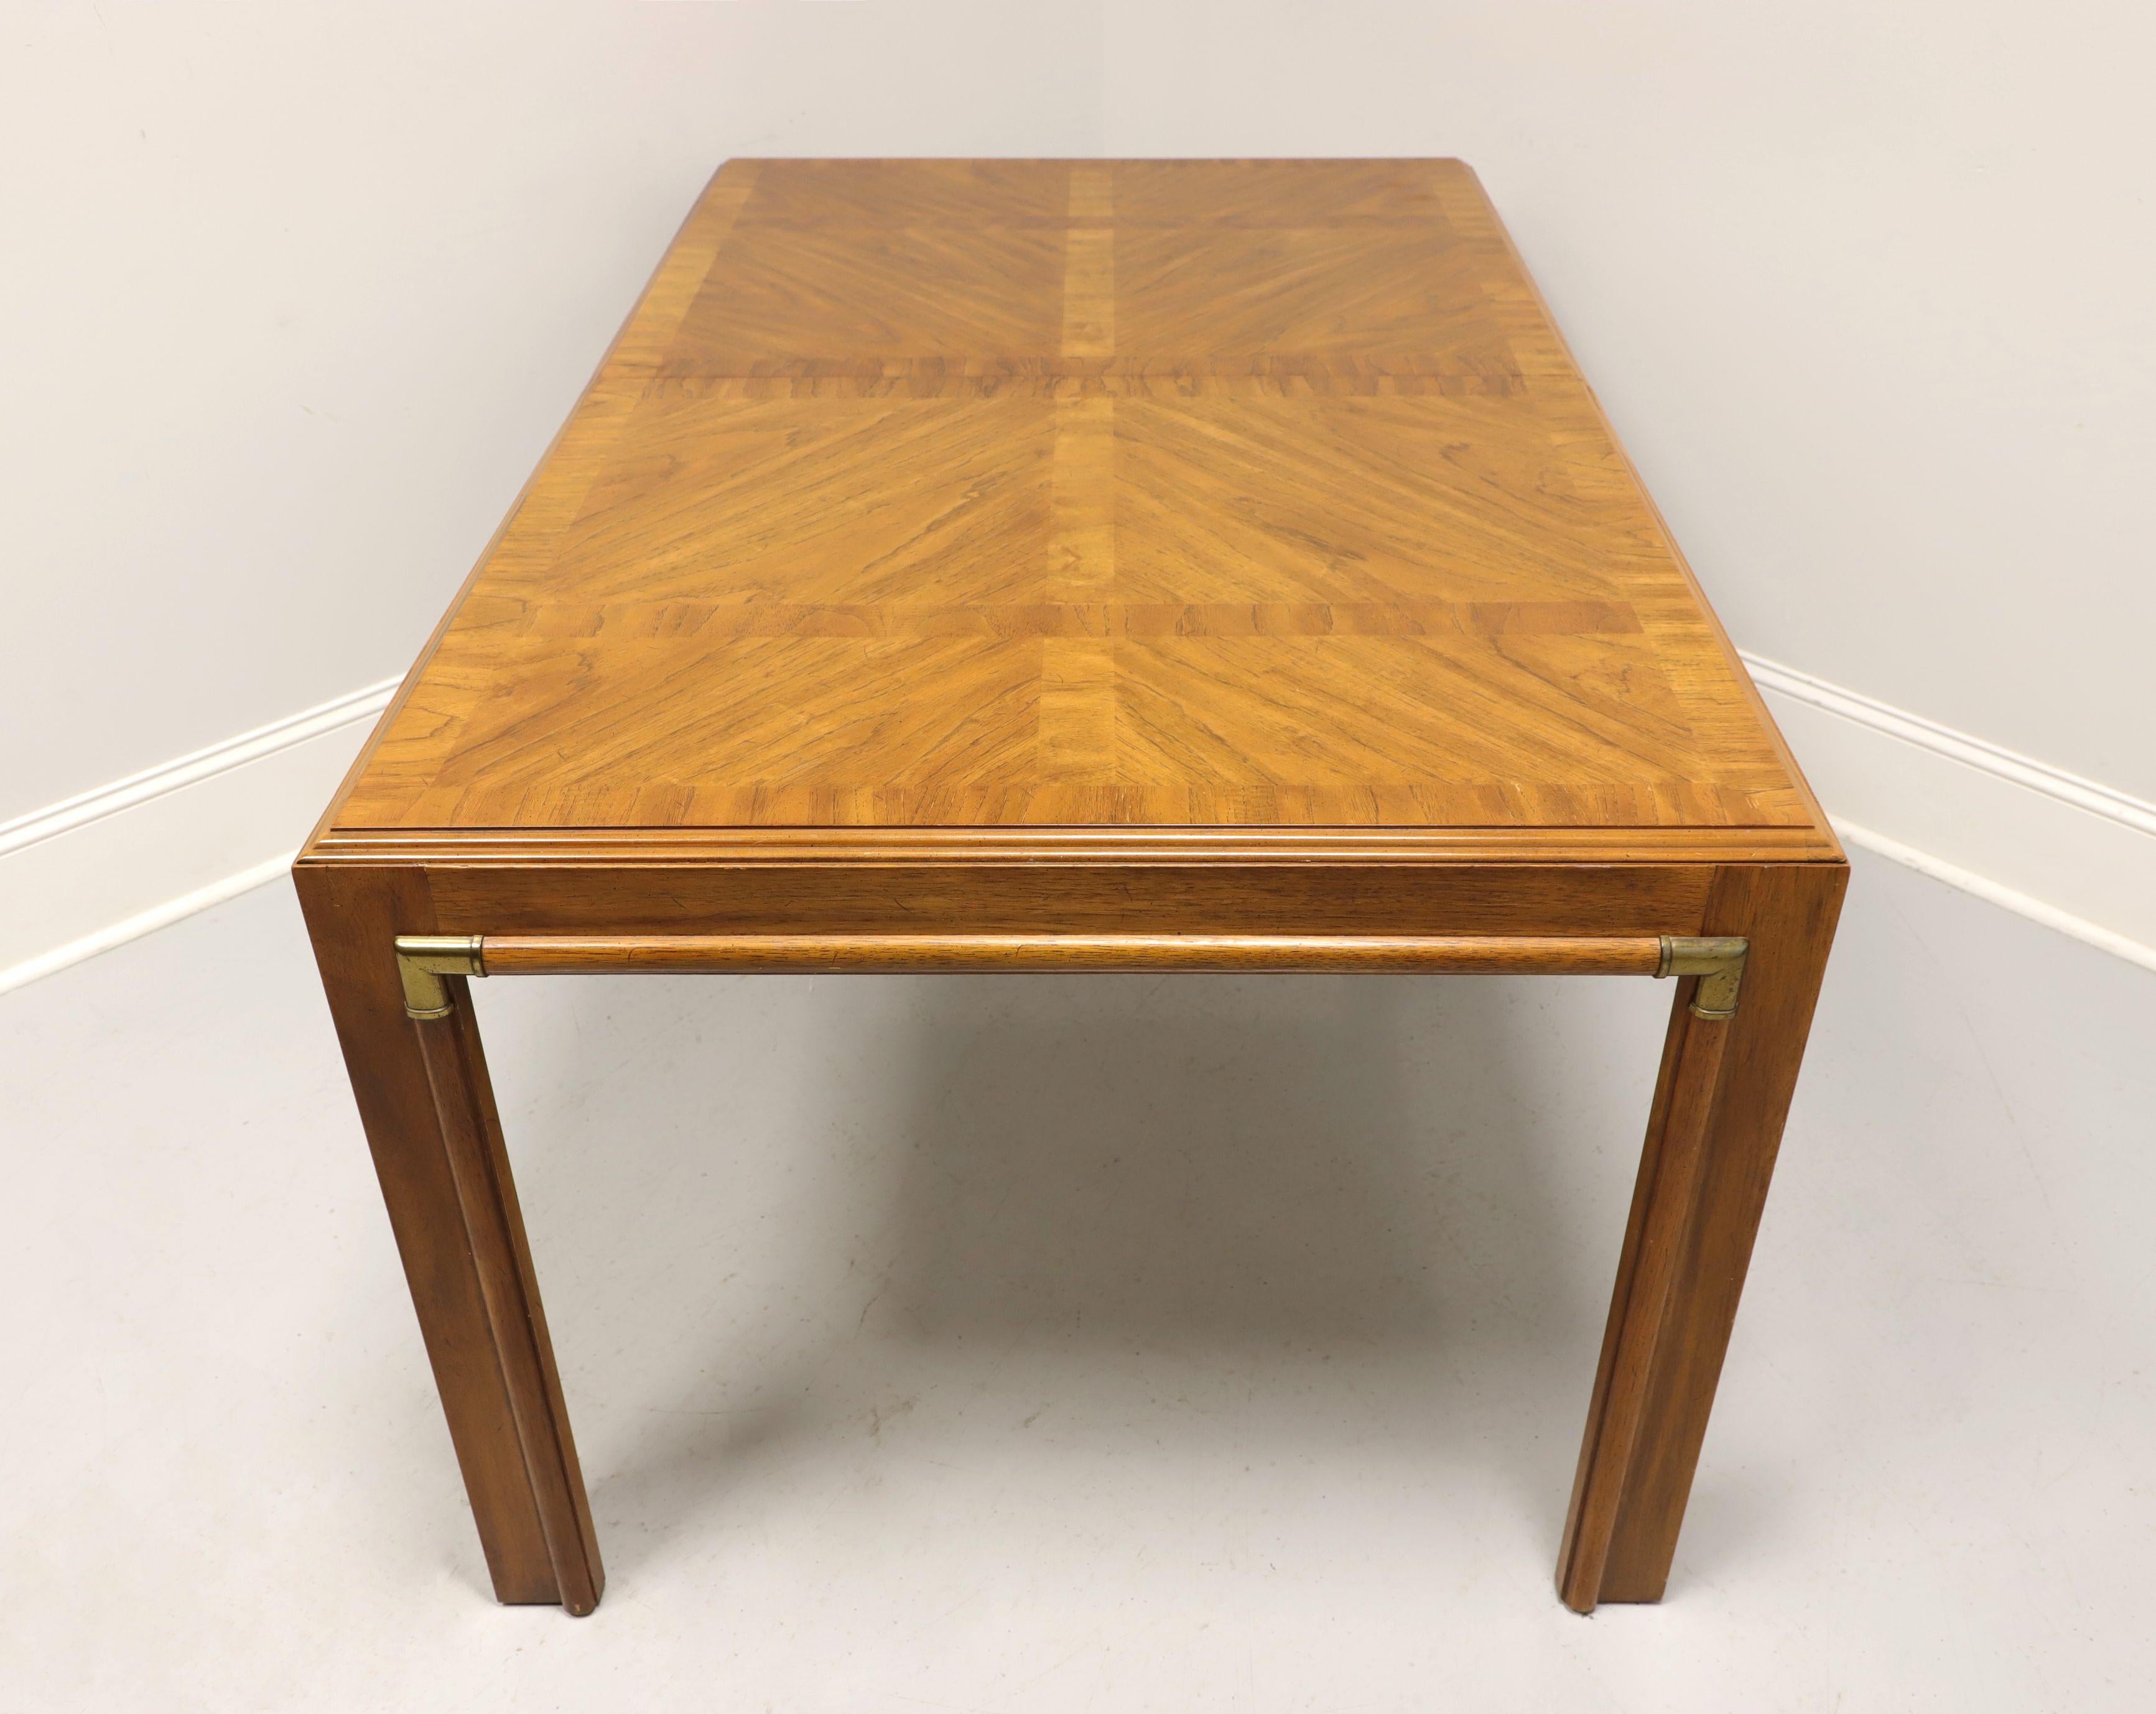 A campaign style rectangular dining table by Drexel, from their Accolade Collection. Pecan with a golden finish, banded top, brass accents and square straight legs. Metal expansion slider. Includes two extension leaves. Made in North Carolina, USA,